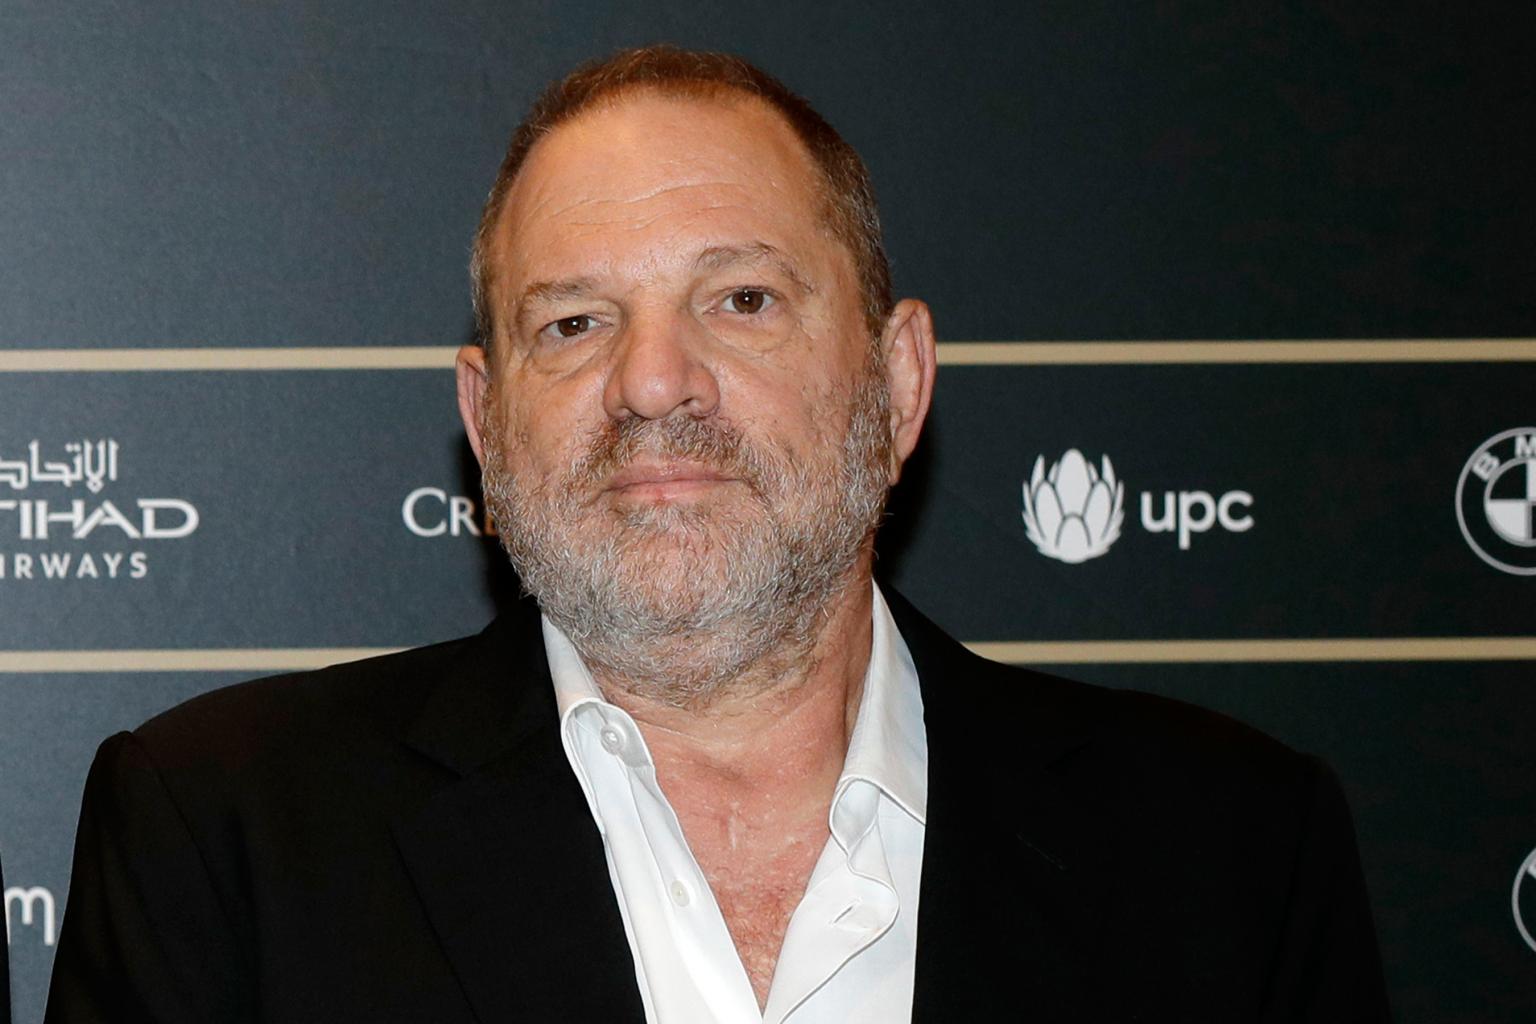 Weinstein Company Hit with Subpoena by NY Attorney General Over Potential Civil Rights Violations